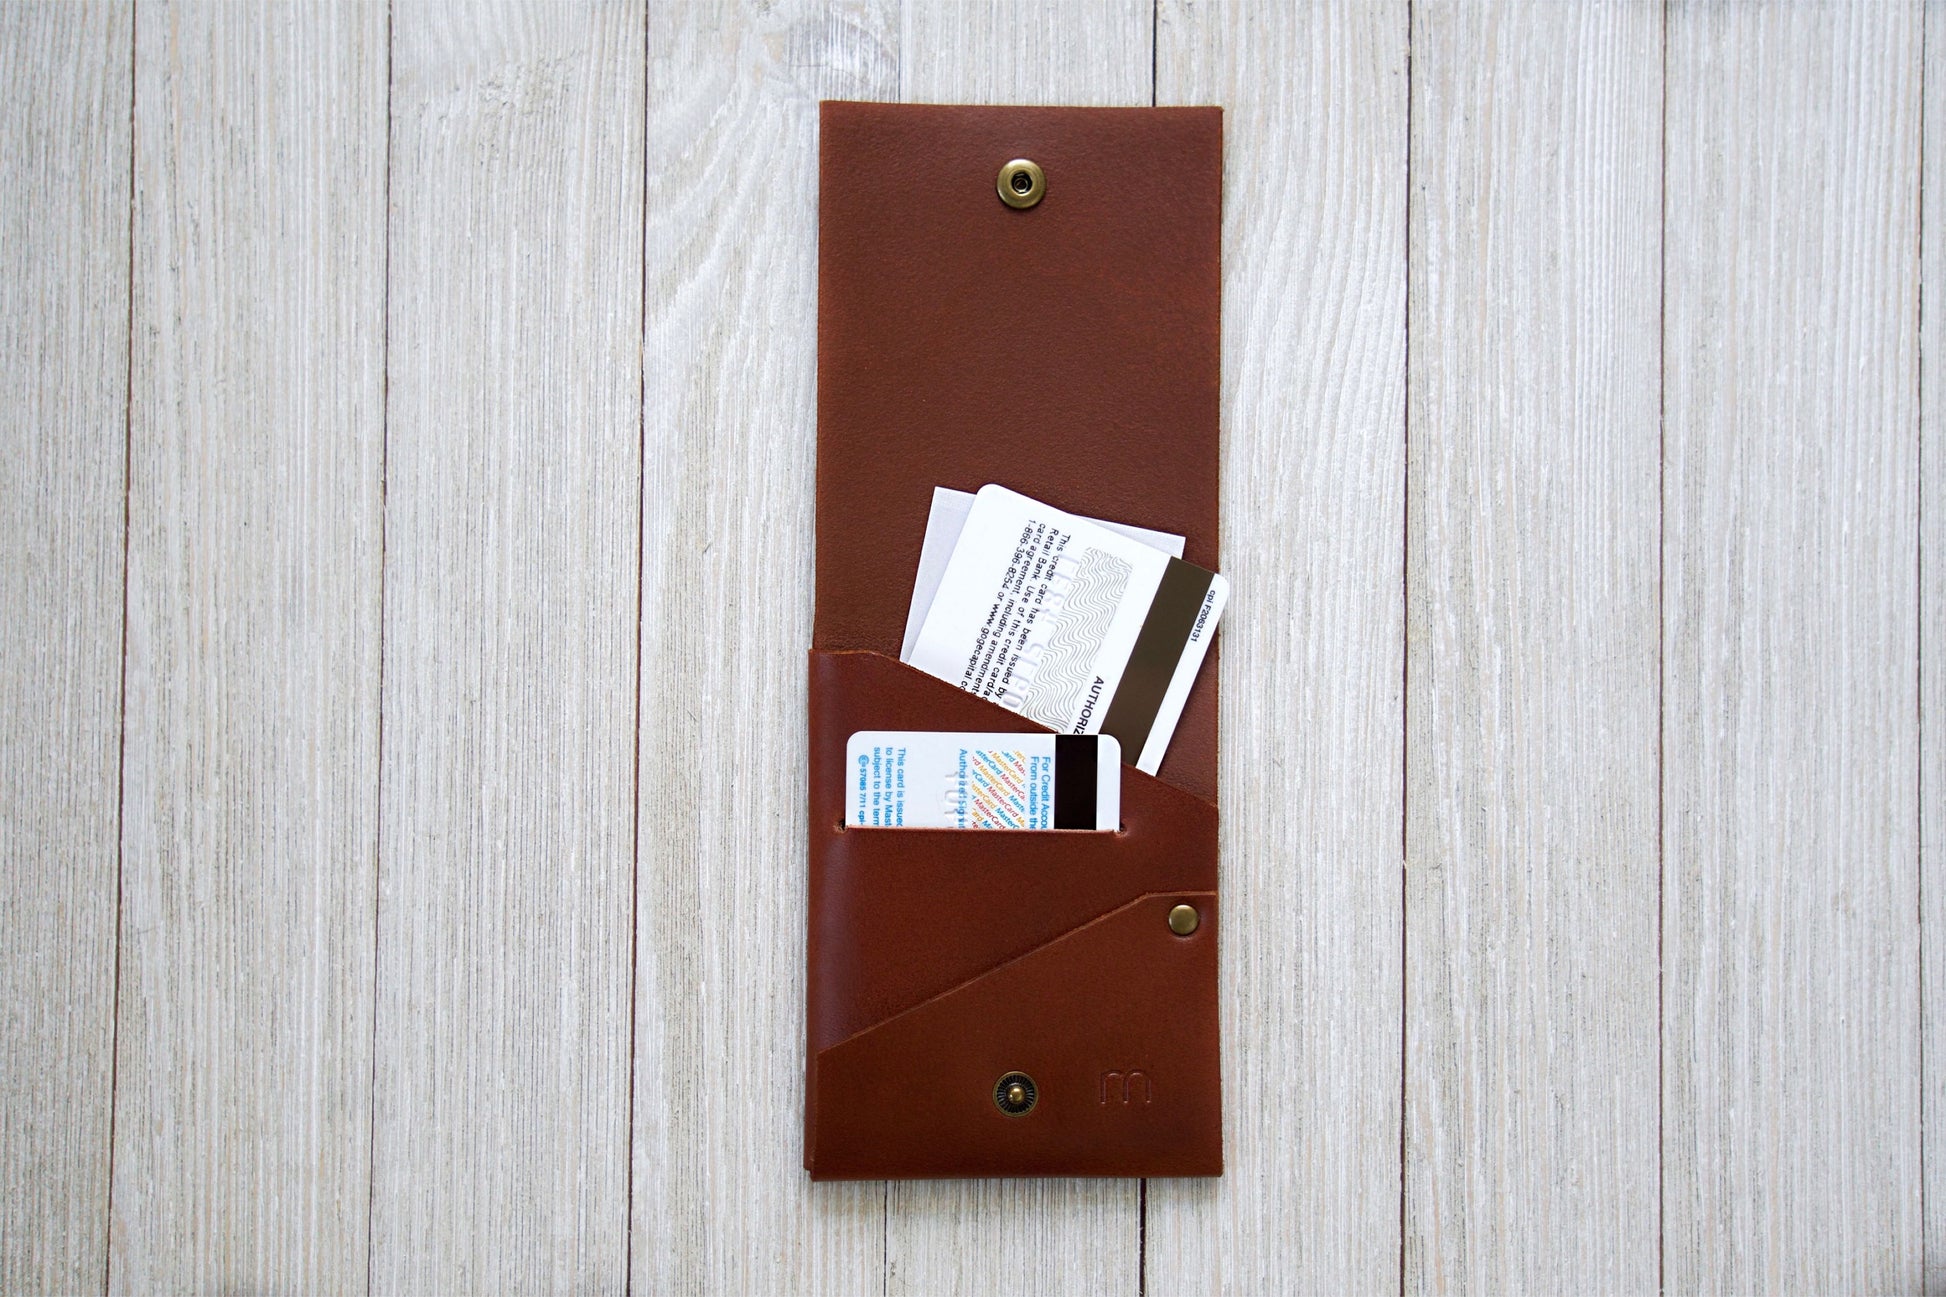 Leather Minimalist Front Pocket Wallet (Come and Take It)